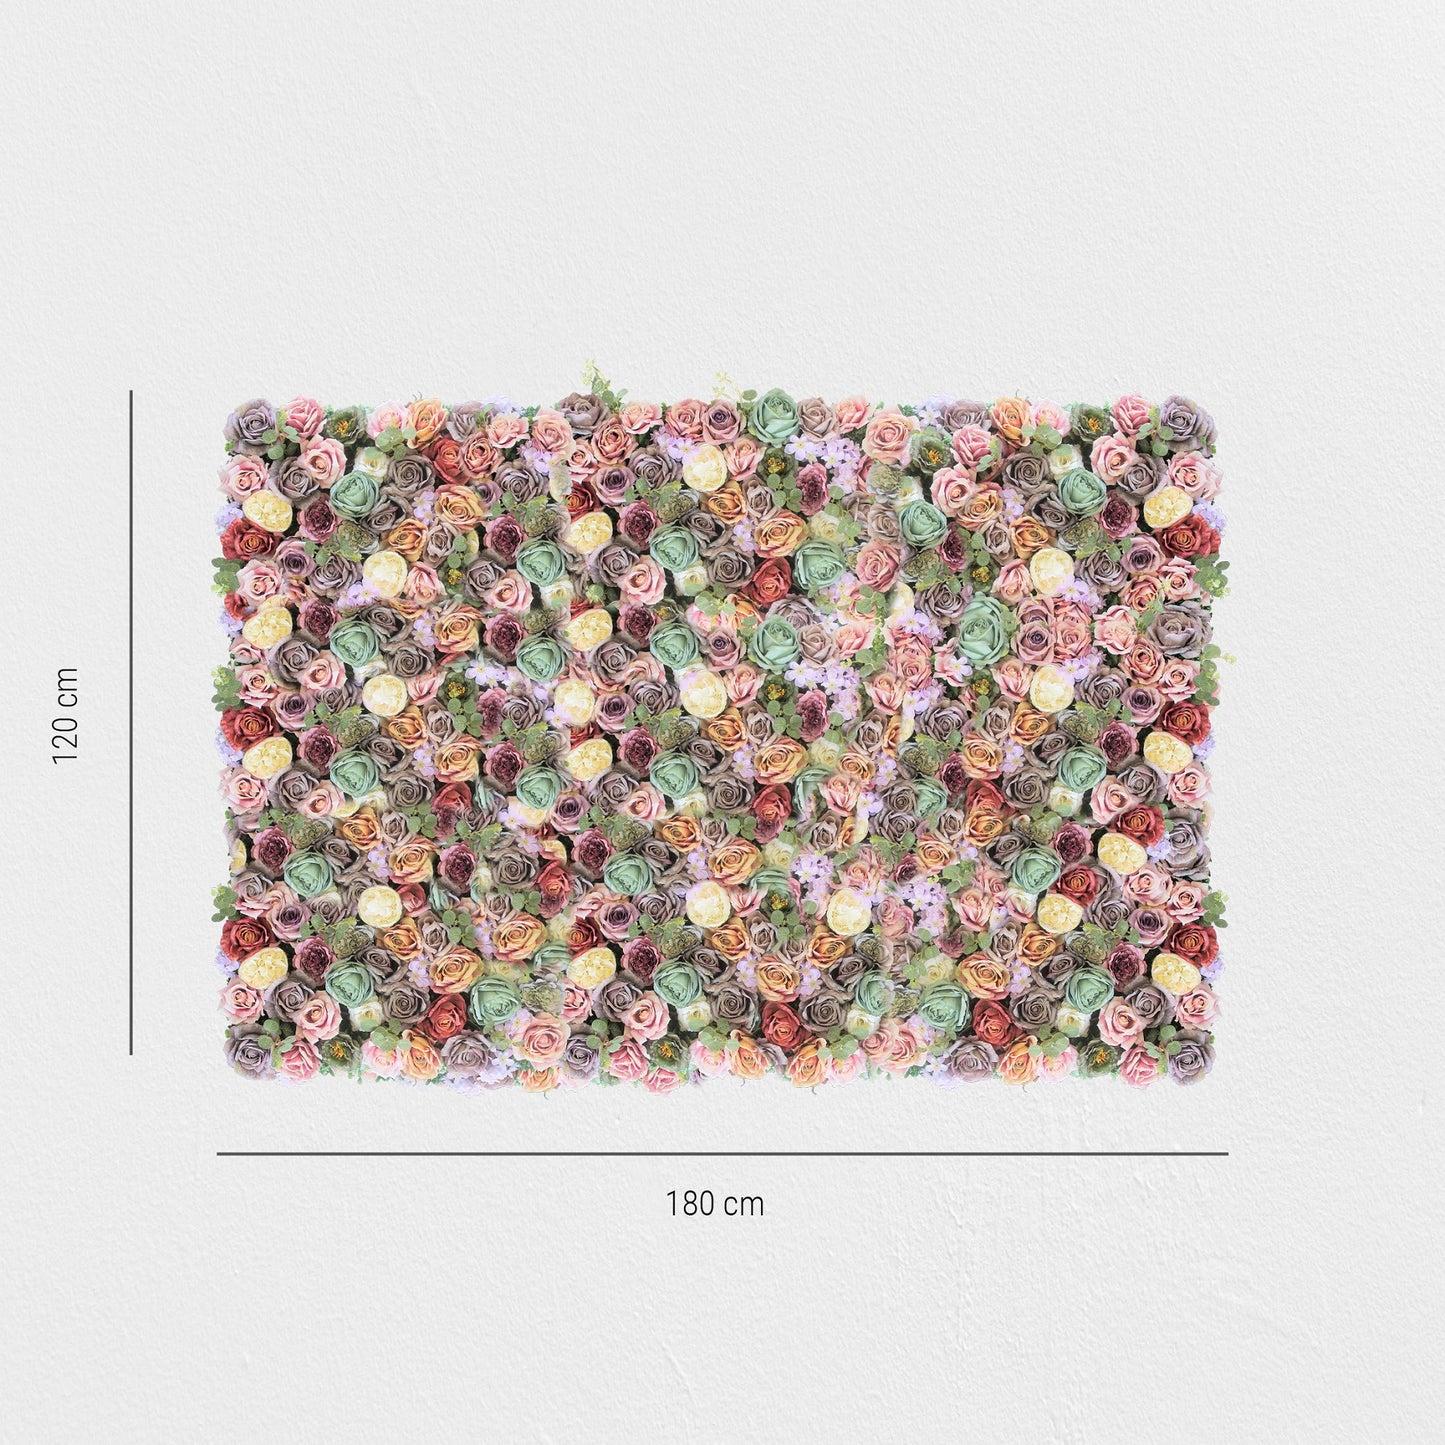 Flower wall "HAZELROSE" made of Realtouch artificial plants